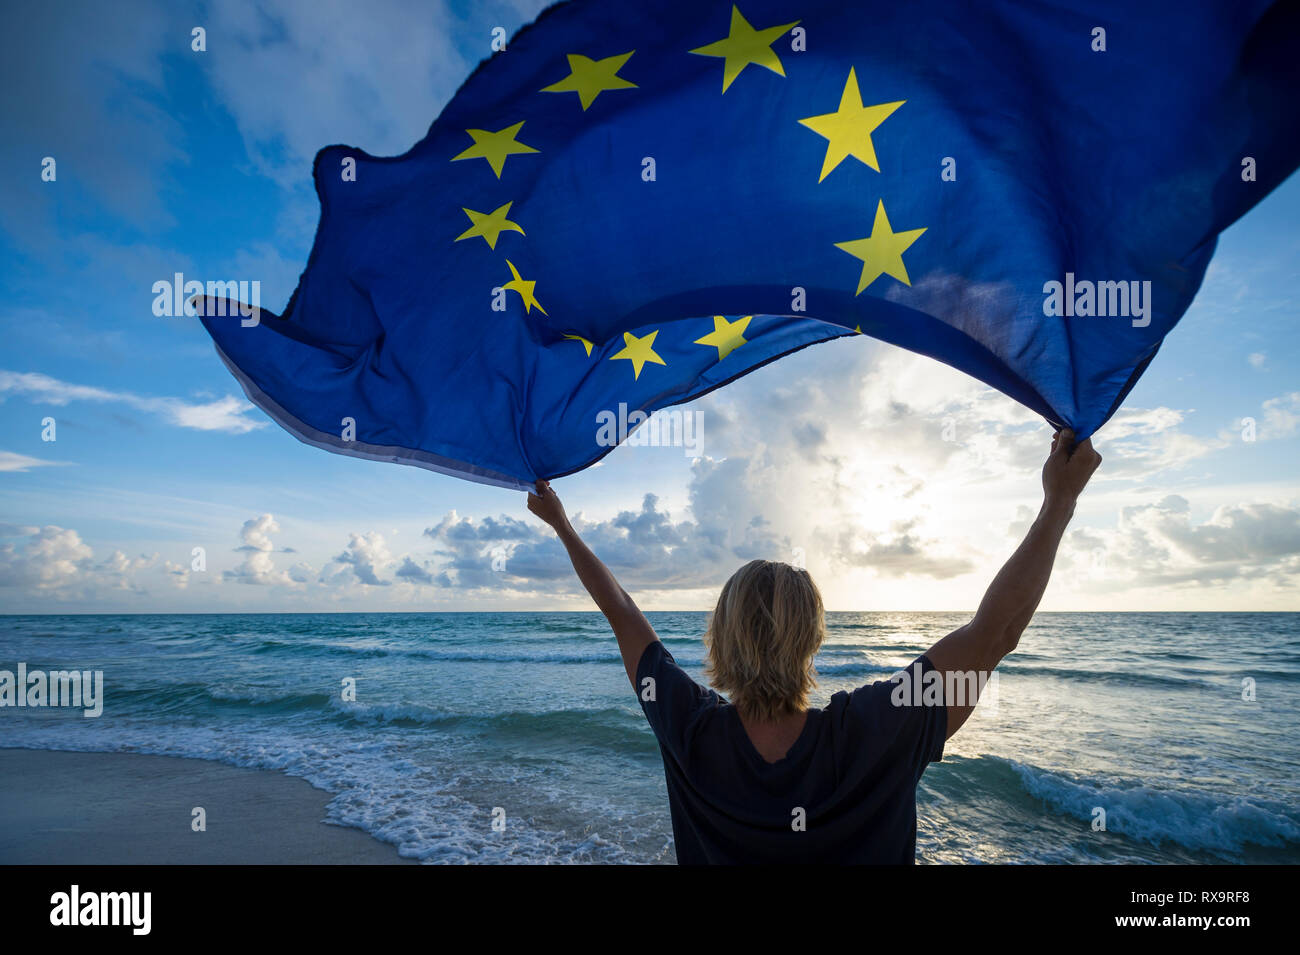 Fluttering European Union flag flying in bright morning sunlight held up by man with blond hair standing on empty Mediterranean beach Stock Photo